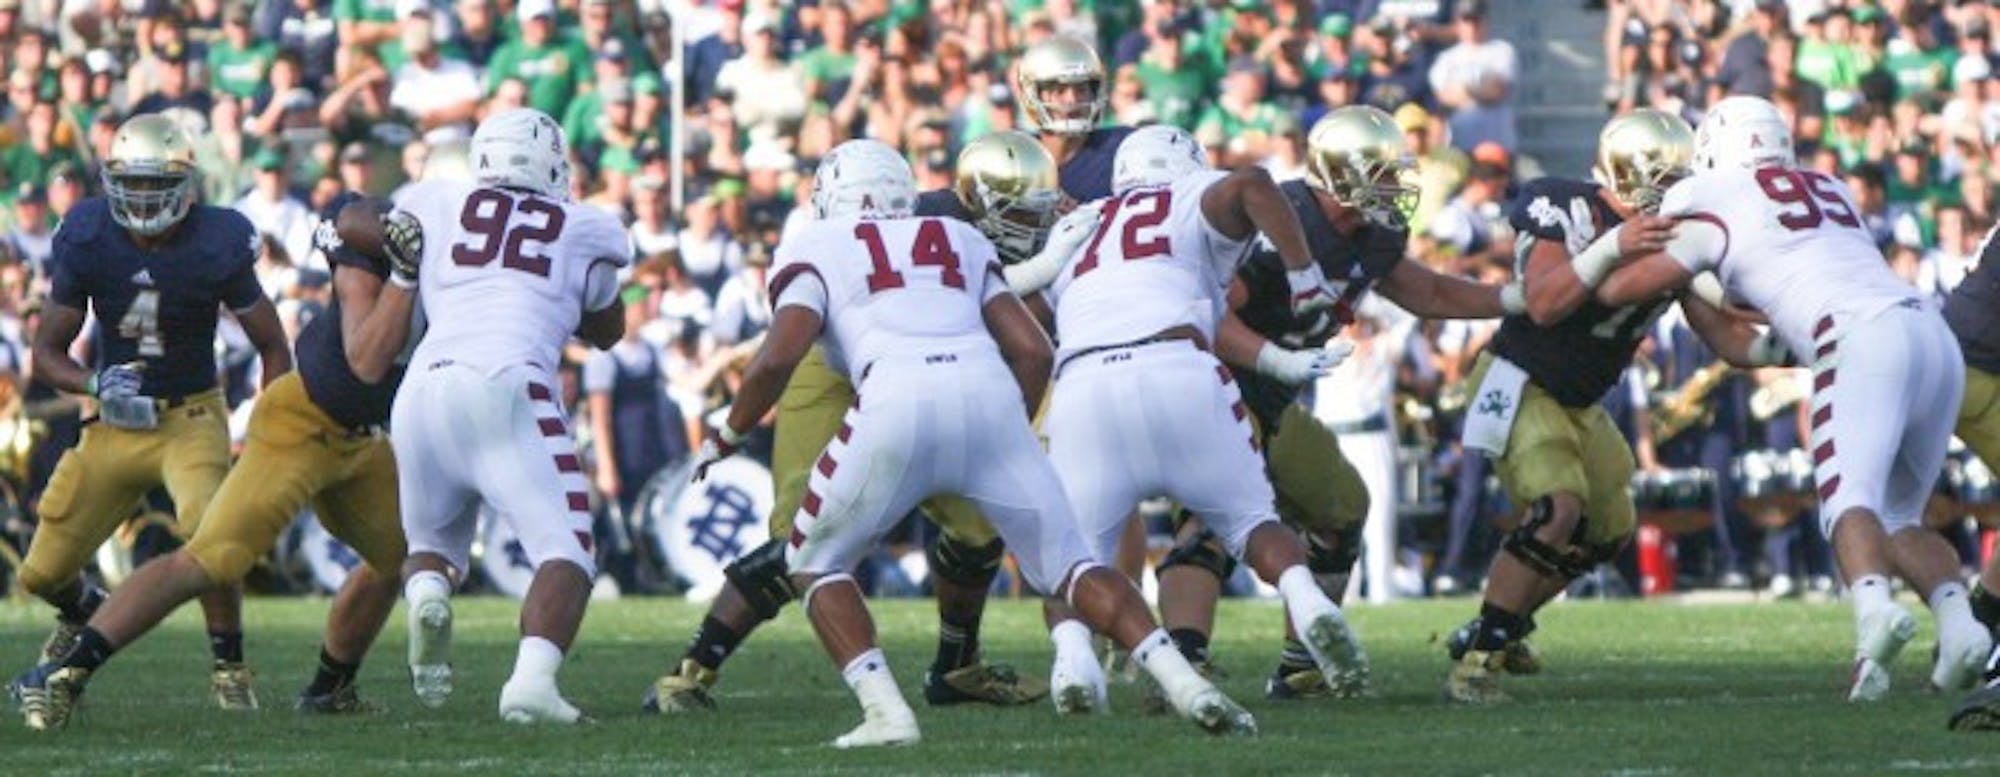 The Temple defense tries to stop Notre Dame during the teams’ meeting Aug. 31, 2013, a 28-6 Irish victory. The Owls have raced out to a 7-0 start this season behind one of the  nation’s best defensive units; Temple is allowing just 14.6 points per game this season, eighth-best in the country, and 308 yards per game.